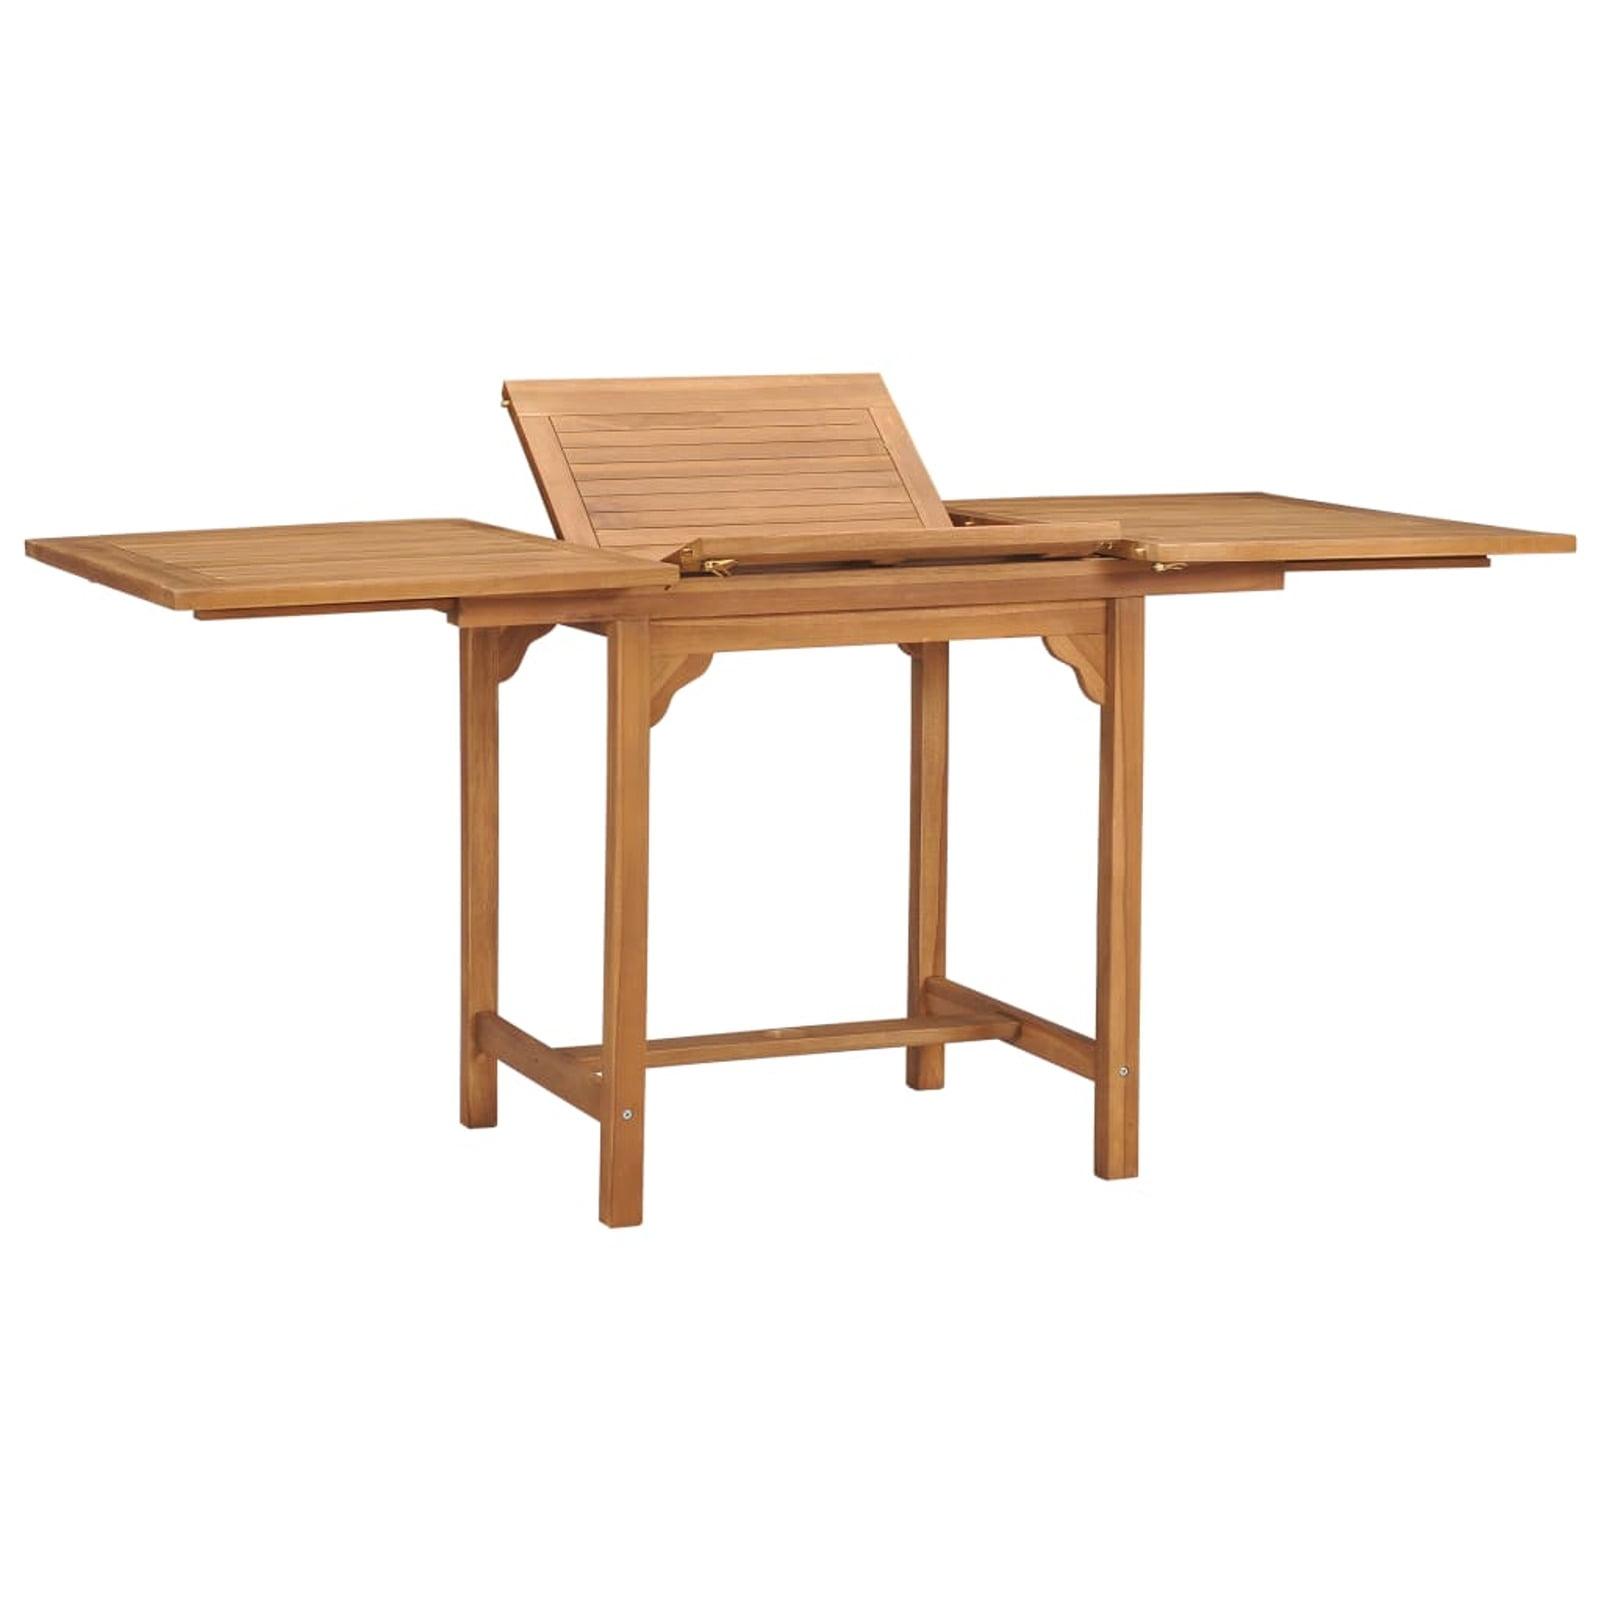 Teakwood Extendable Patio Dining Table 43.3"-63" with Umbrella Hole